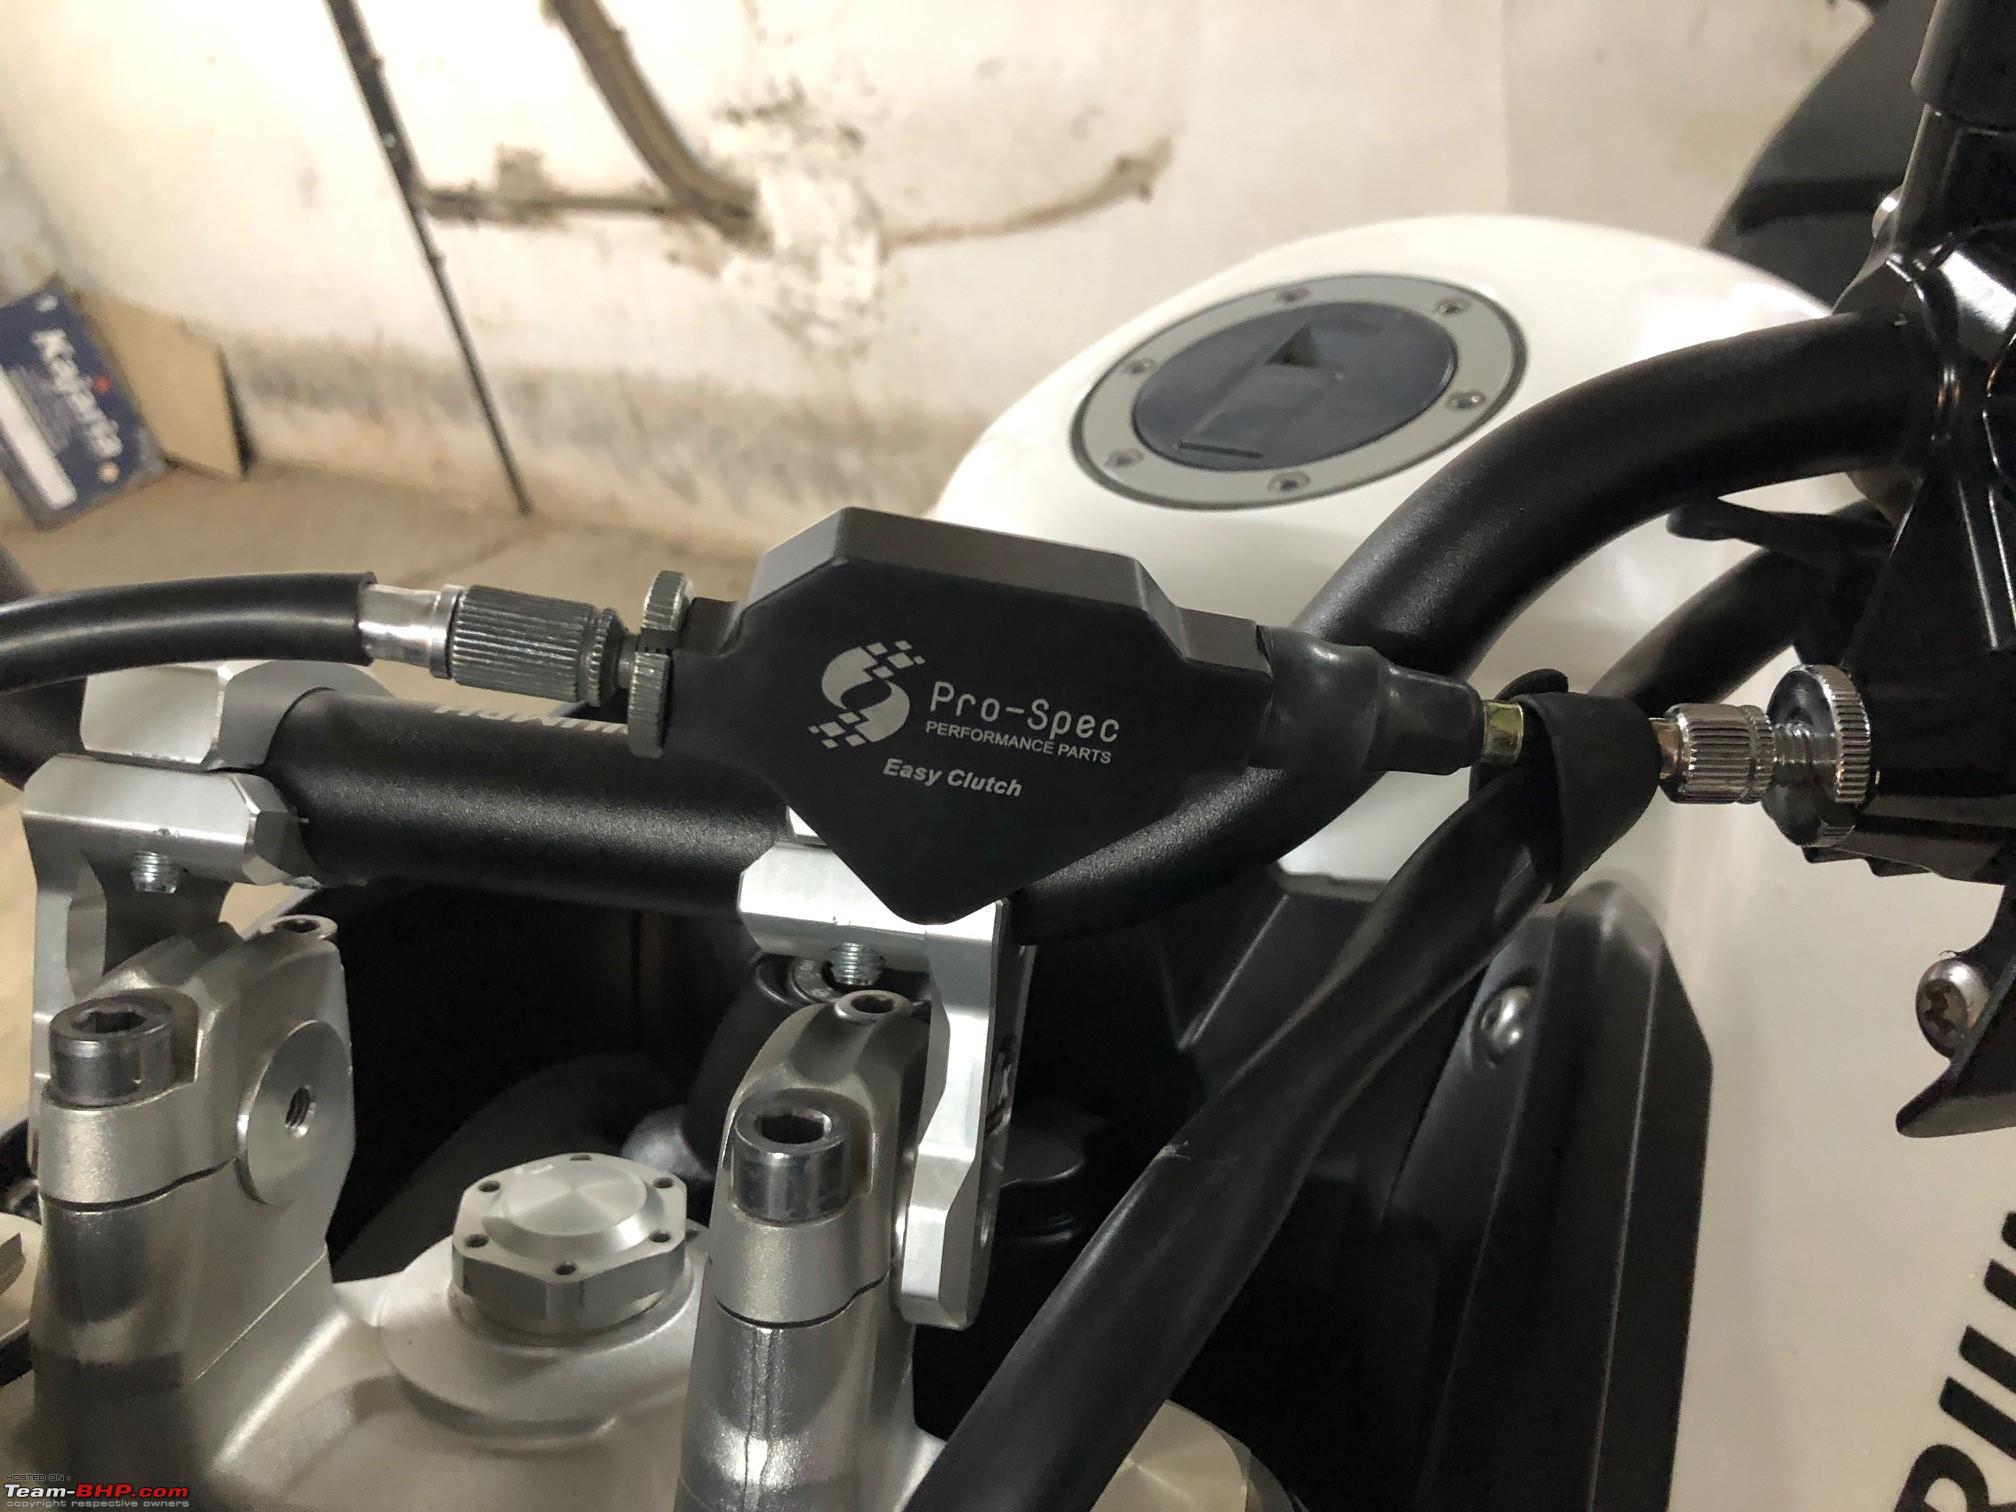 Easy Clutch by Pro-Spec: Reduces effort to operate clutch lever! - Team-BHP